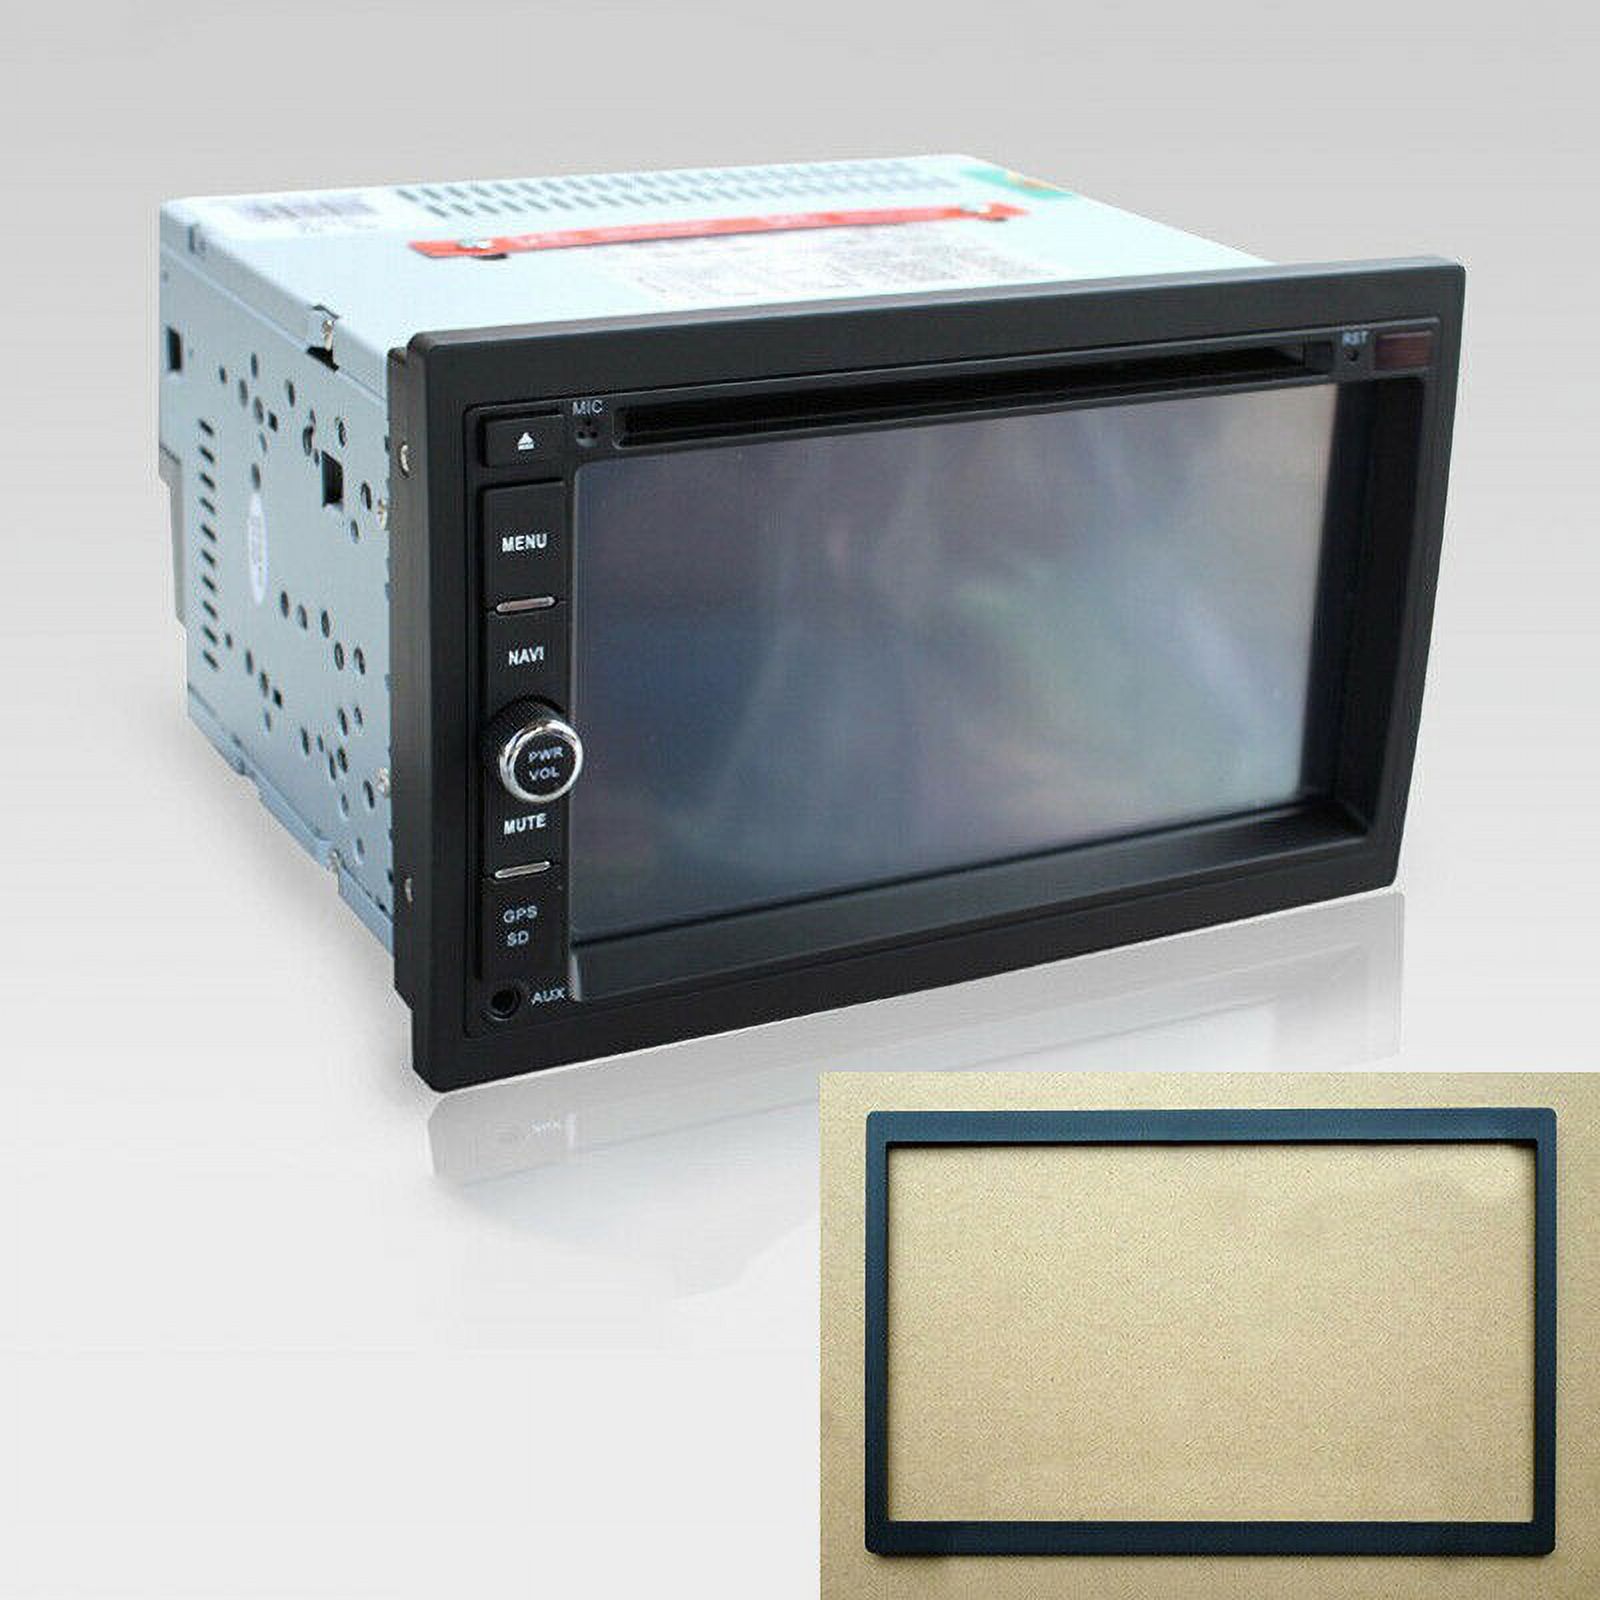 UHUSE 2Din Stereo Audio Dash Bezel Panel Mounting Frame for Car Radio DVD Player - image 2 of 6